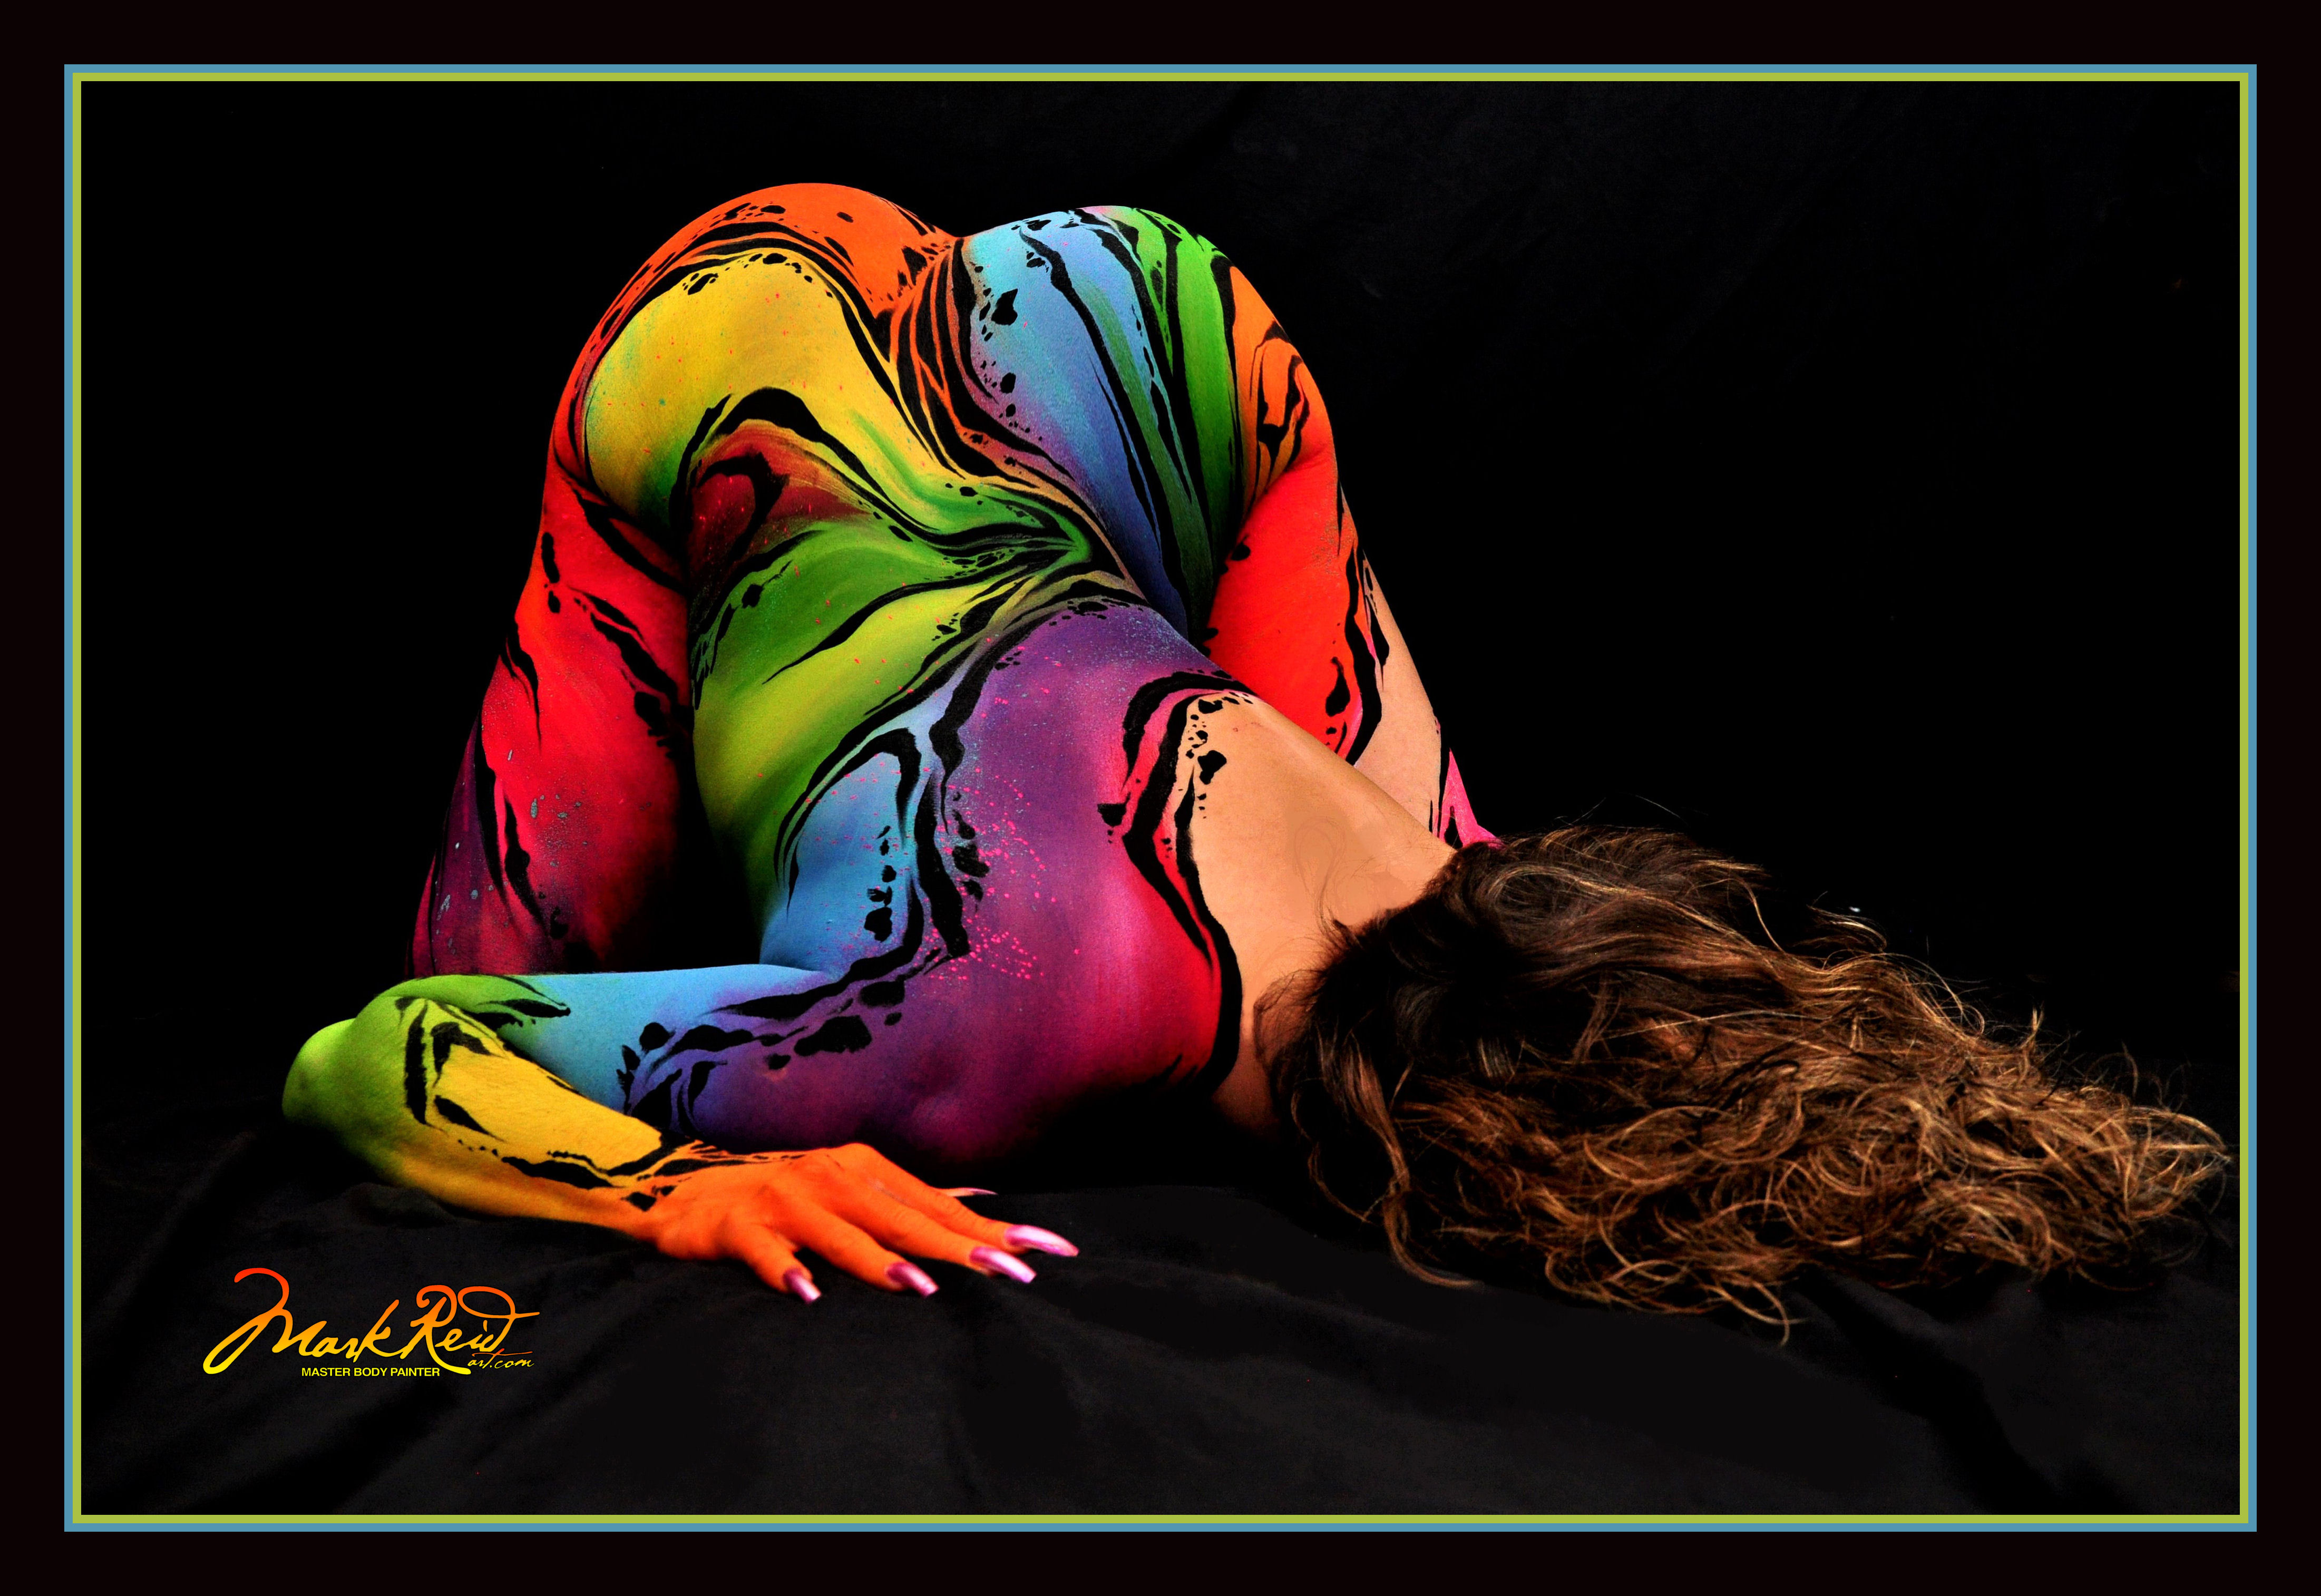 Brunette woman face down toward the camera with body paint that is brightly colored on her visible skin including her back, arms, and her buttocks.